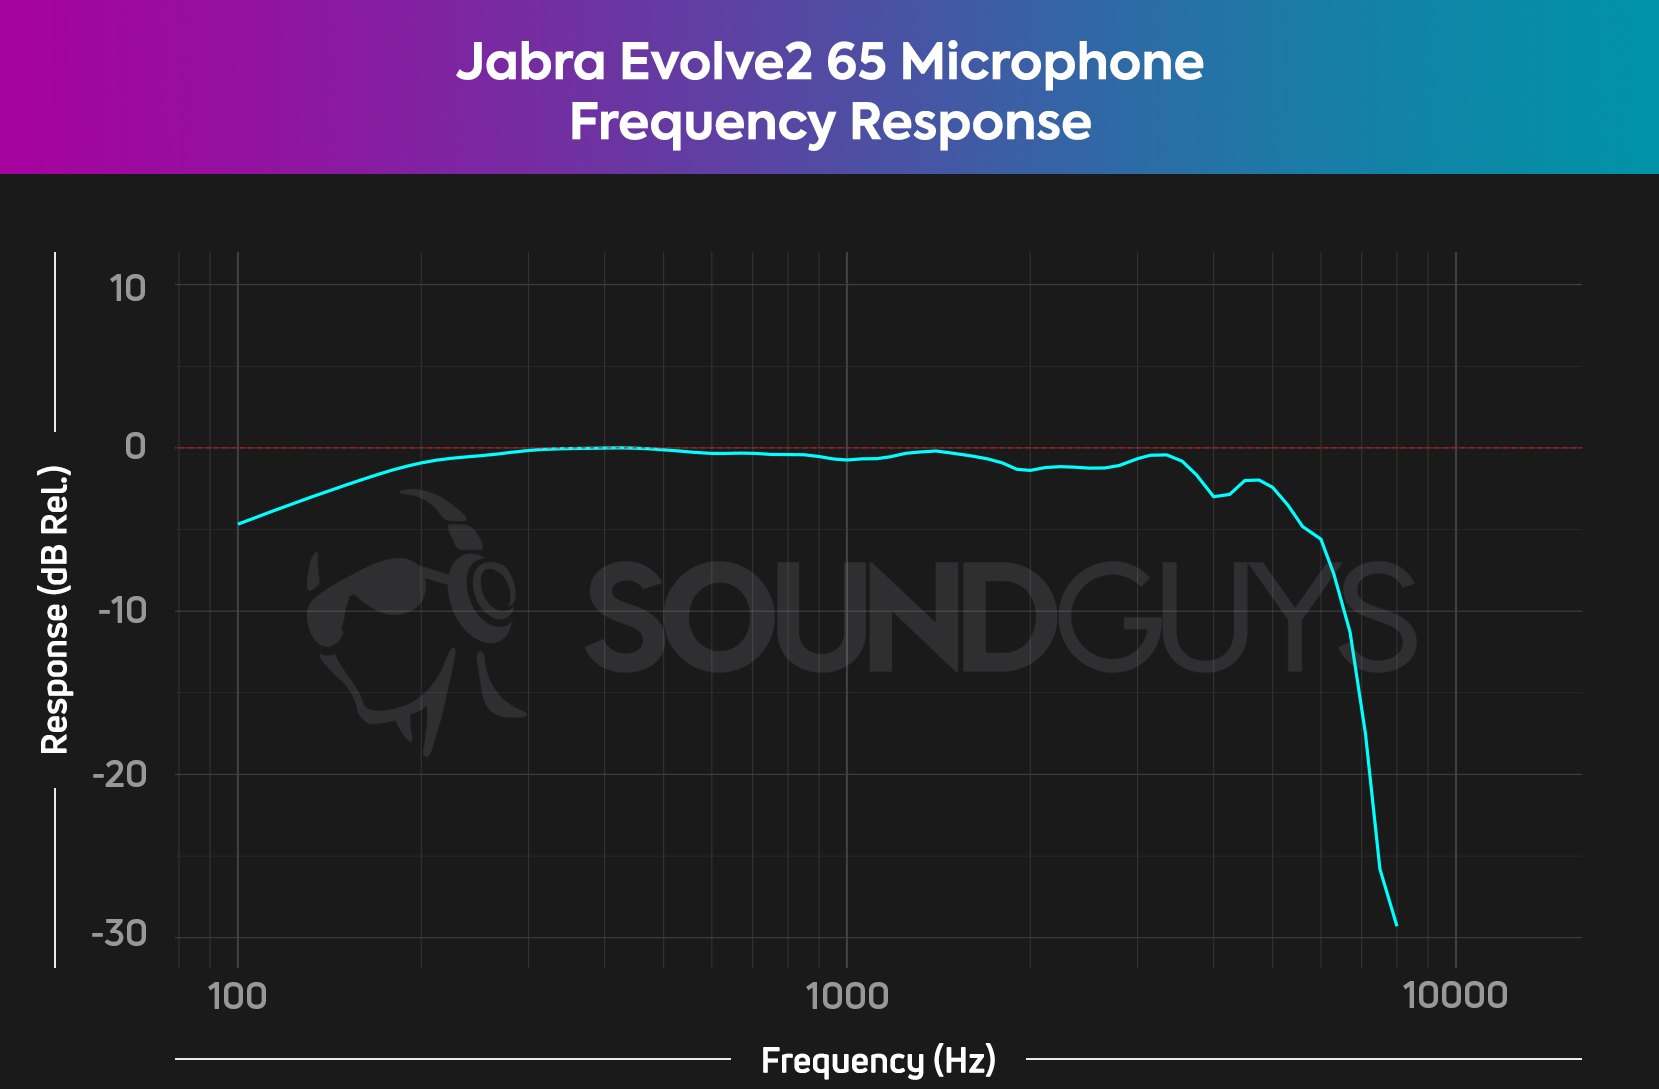 The Jabra Evolve2 65 microphone frequency response chart showing a fairly flat response up to around 8 KHz. 